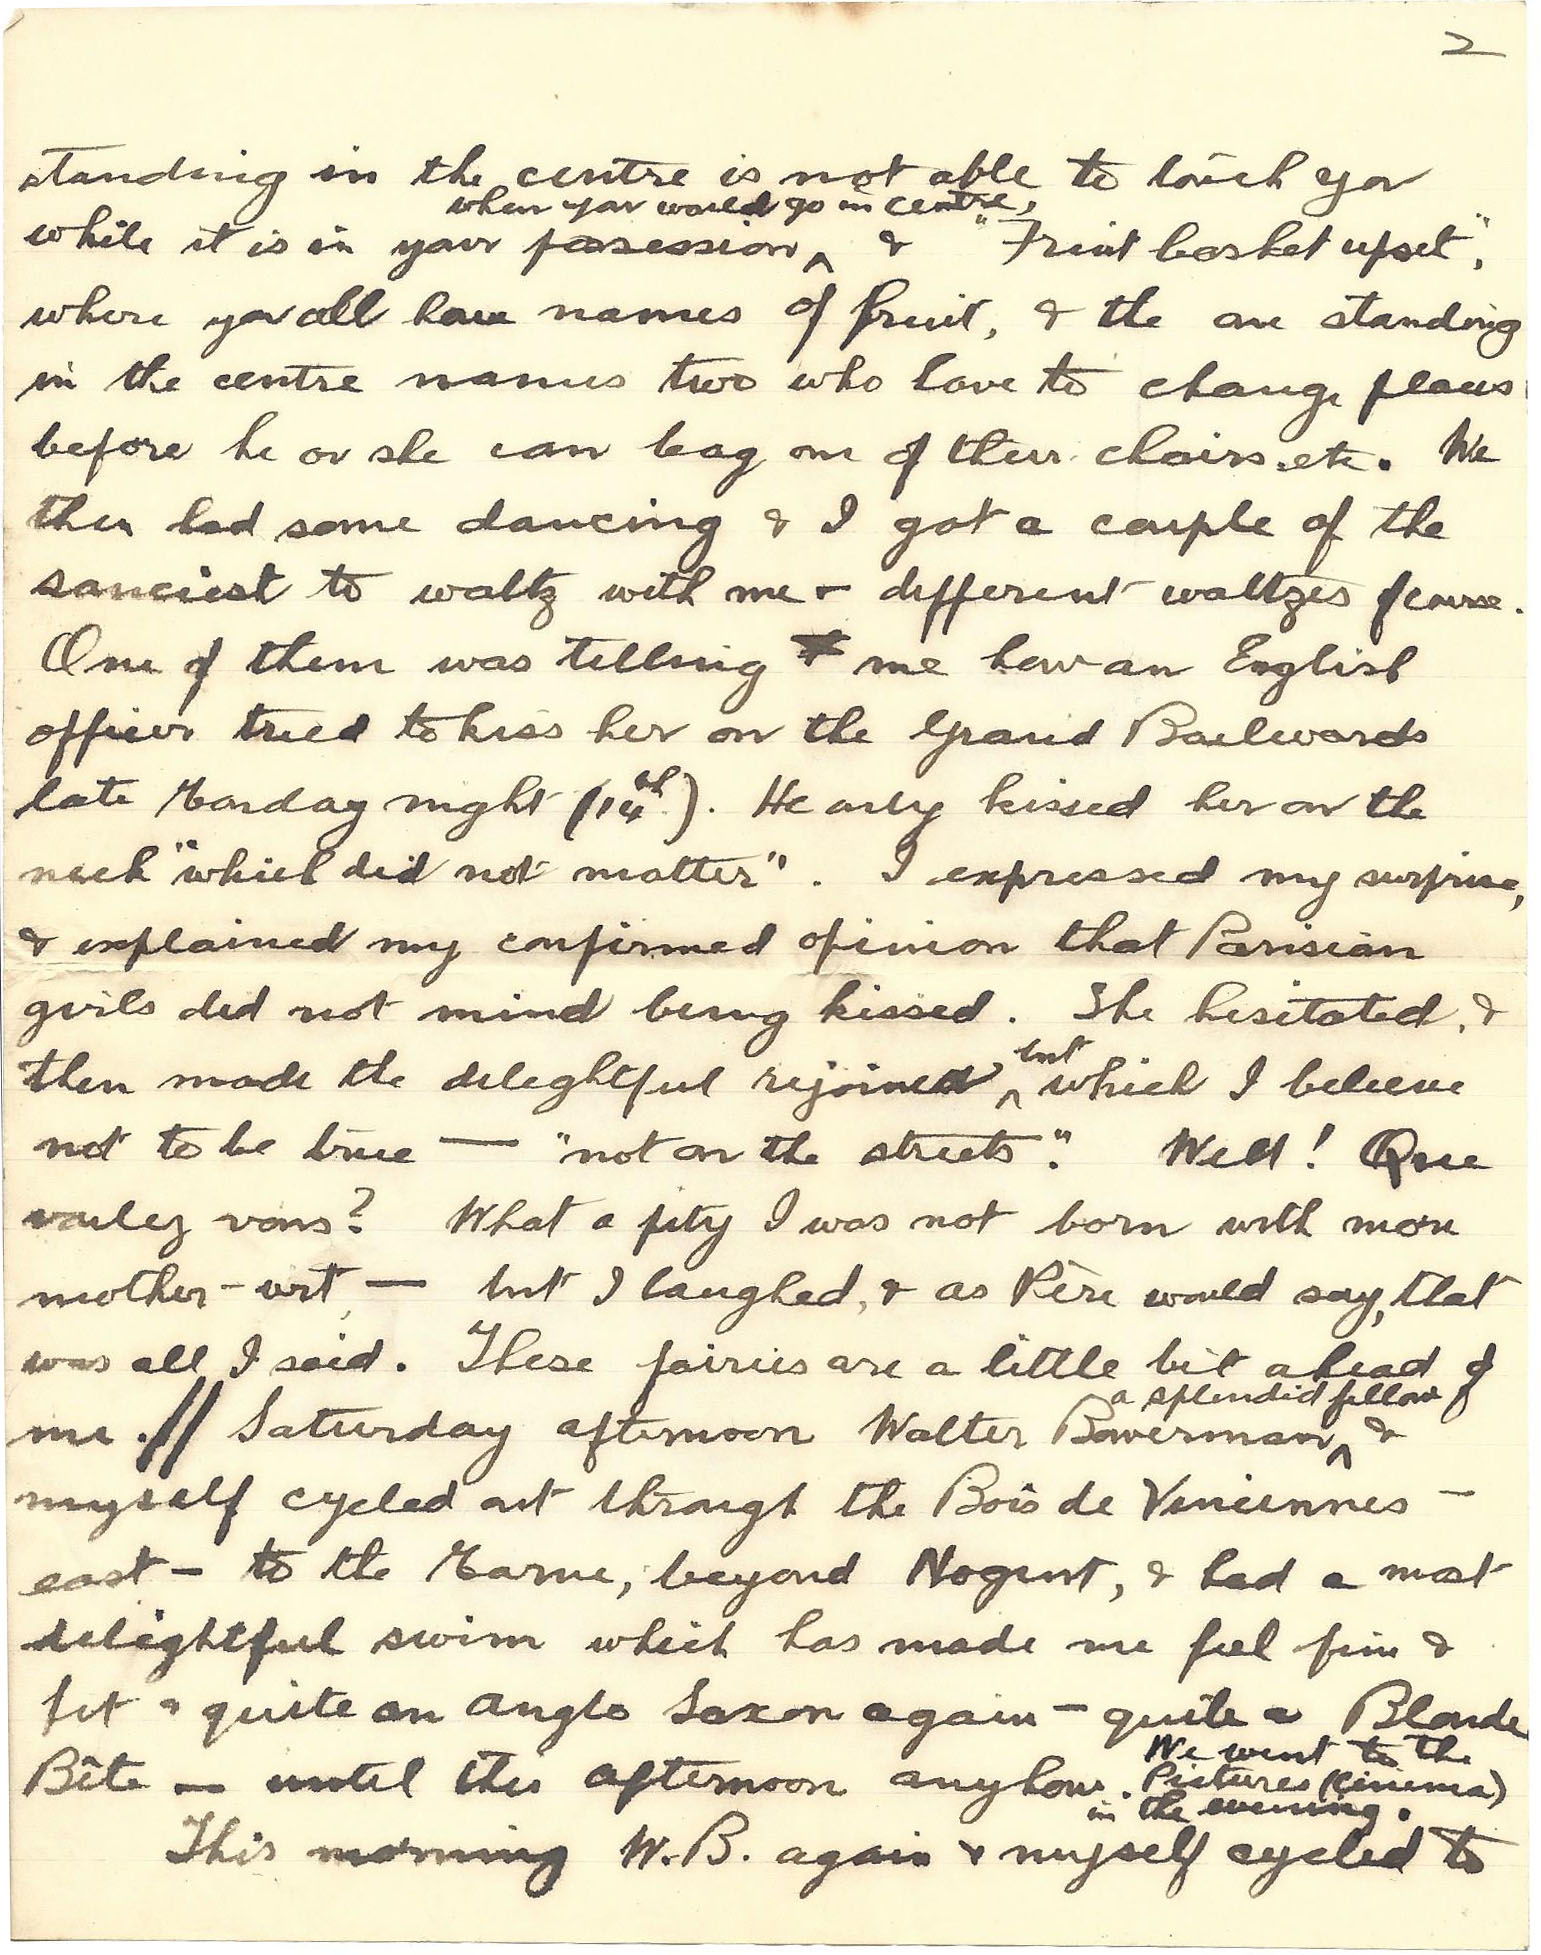 1919-07-20 p2 Donald Bearman letter to his father